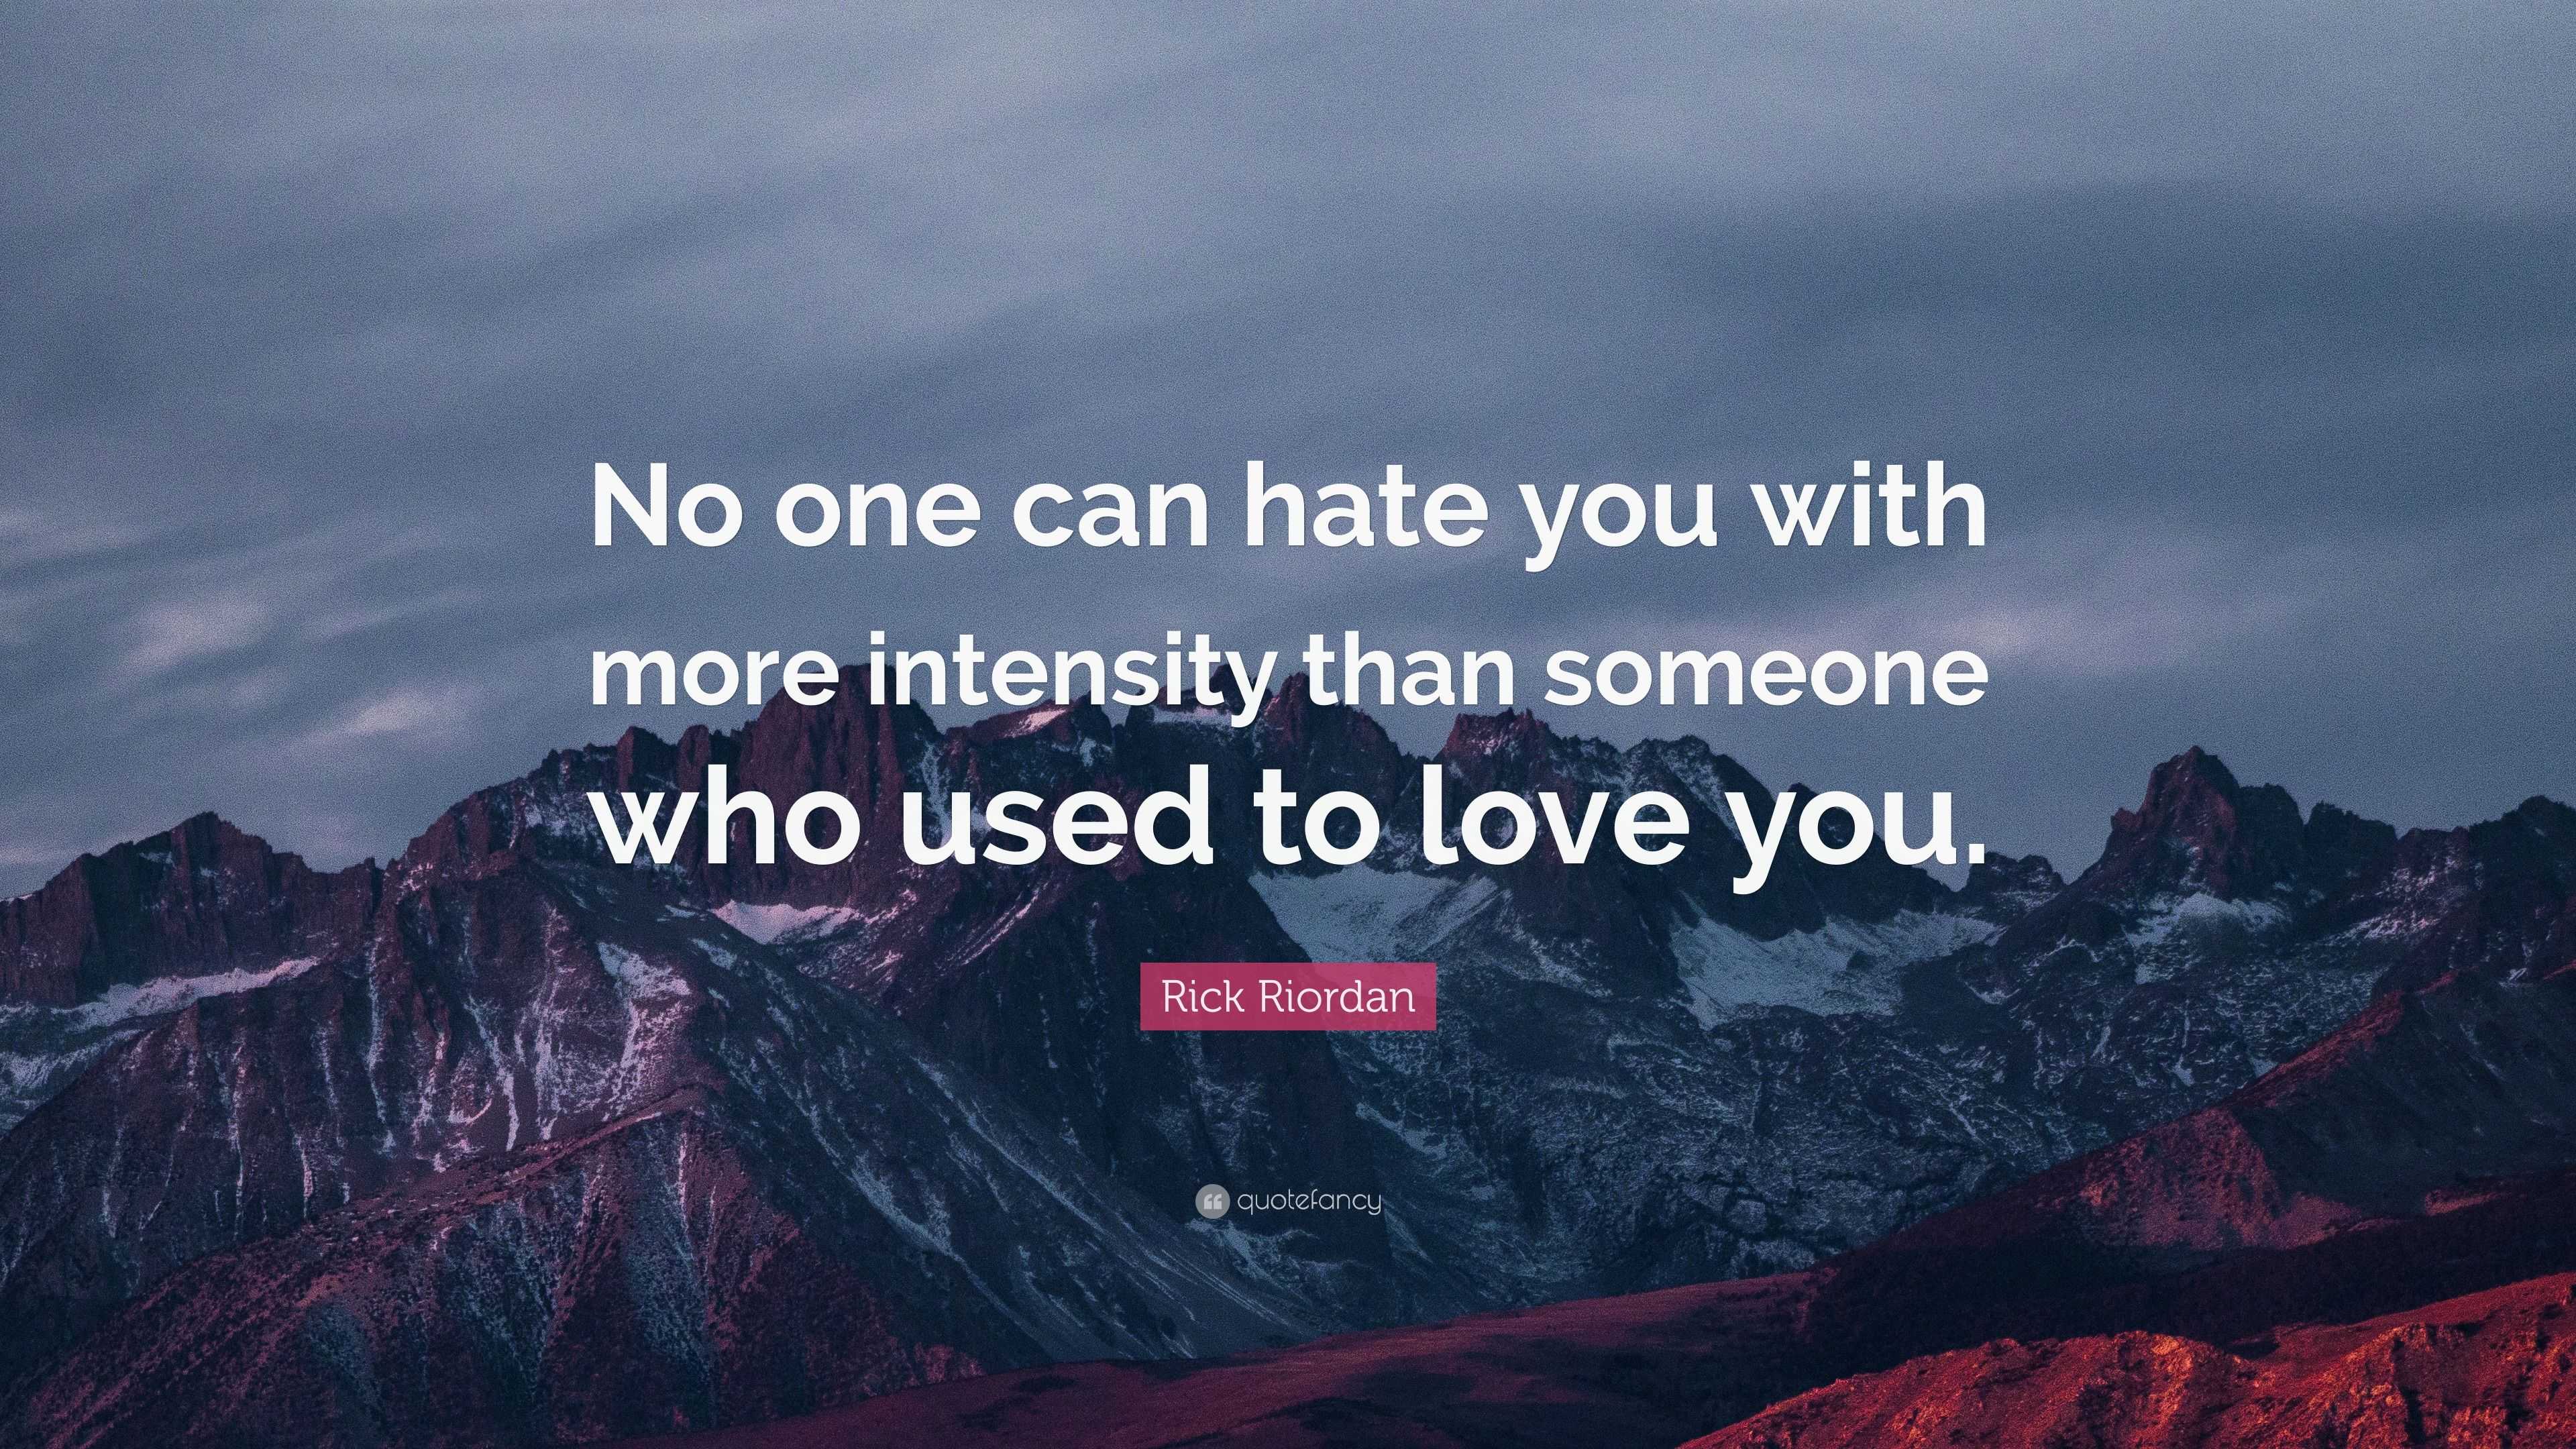 Rick Riordan Quote “No one can hate you with more intensity than someone who